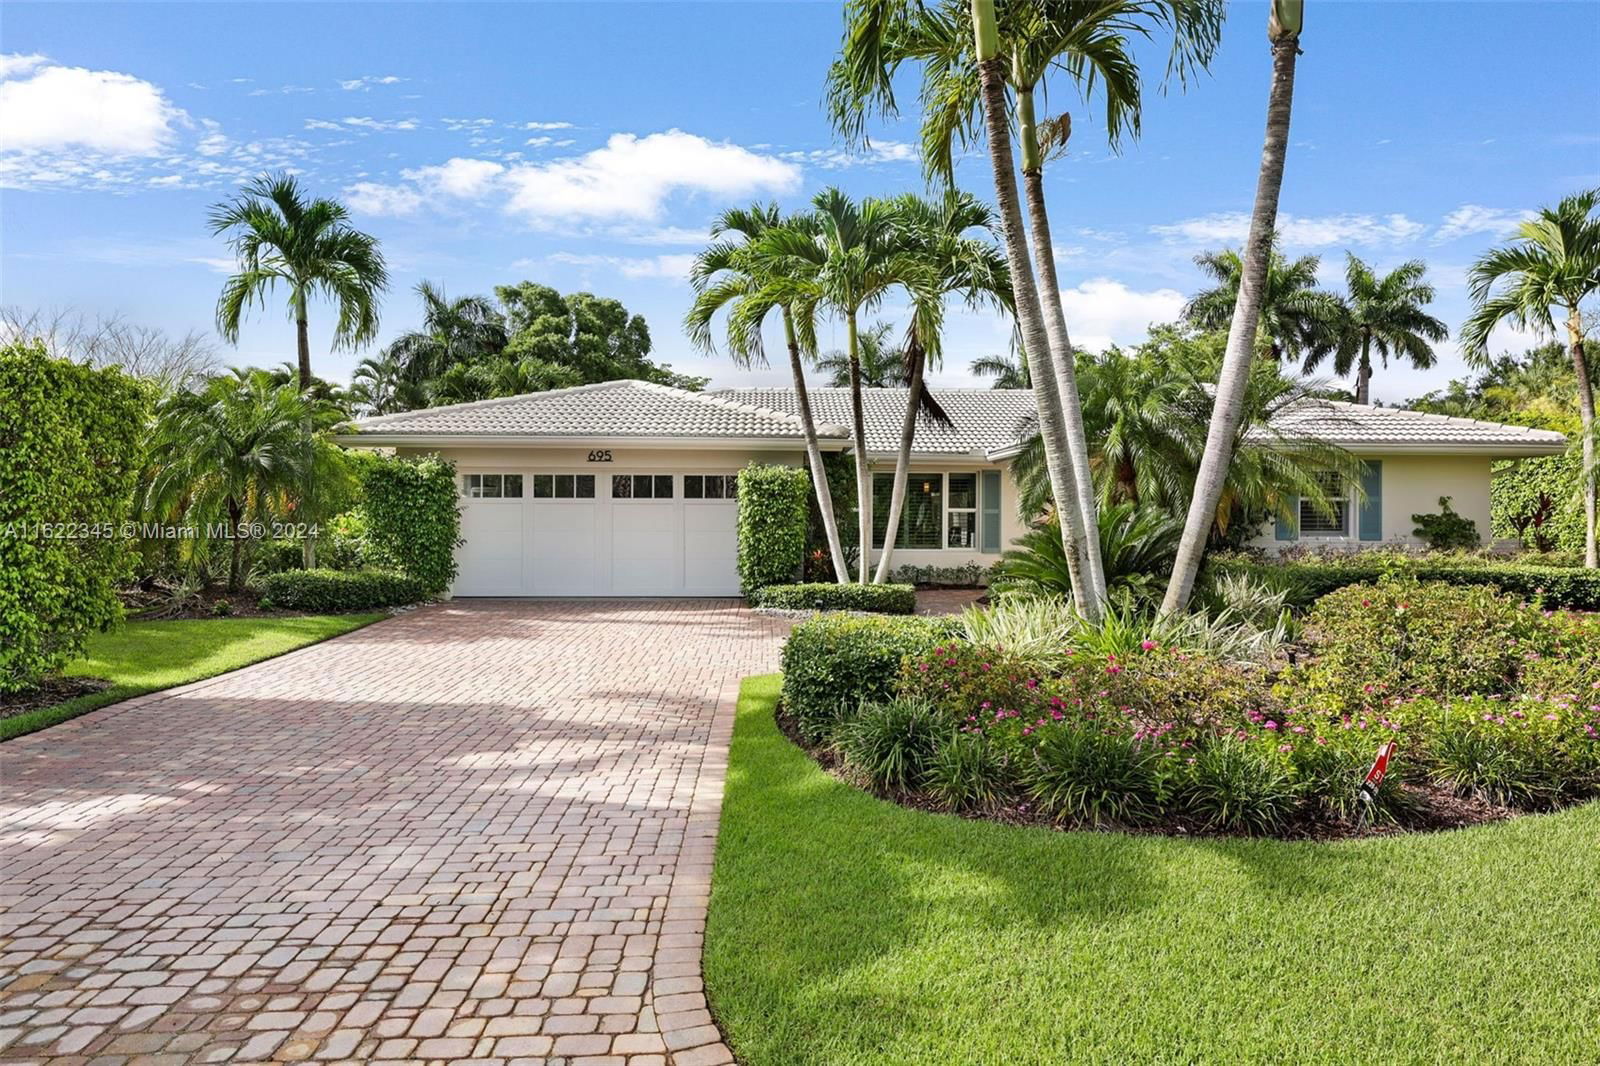 Real estate property located at 695 Regatta, Collier County, Moorings, Naples, FL